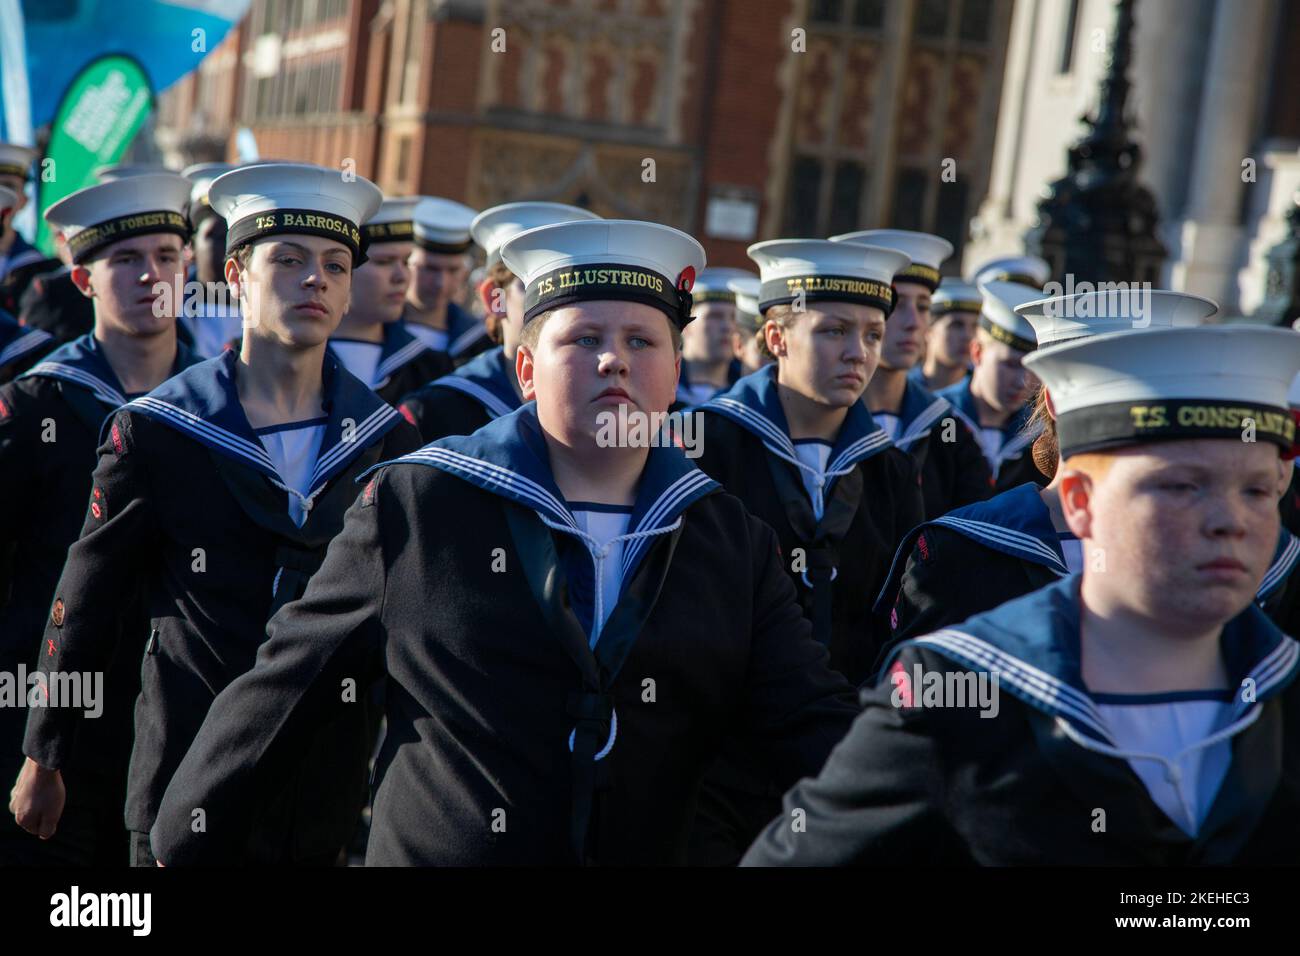 London, UK. 12th November 2022. Sea cadets take part in the Lord Mayor’s Show in honor of the 694th Lord Mayor of the City of London, Alderman Nicholas Lyons. Credit: Kiki Streitberger/Alamy Live News Stock Photo